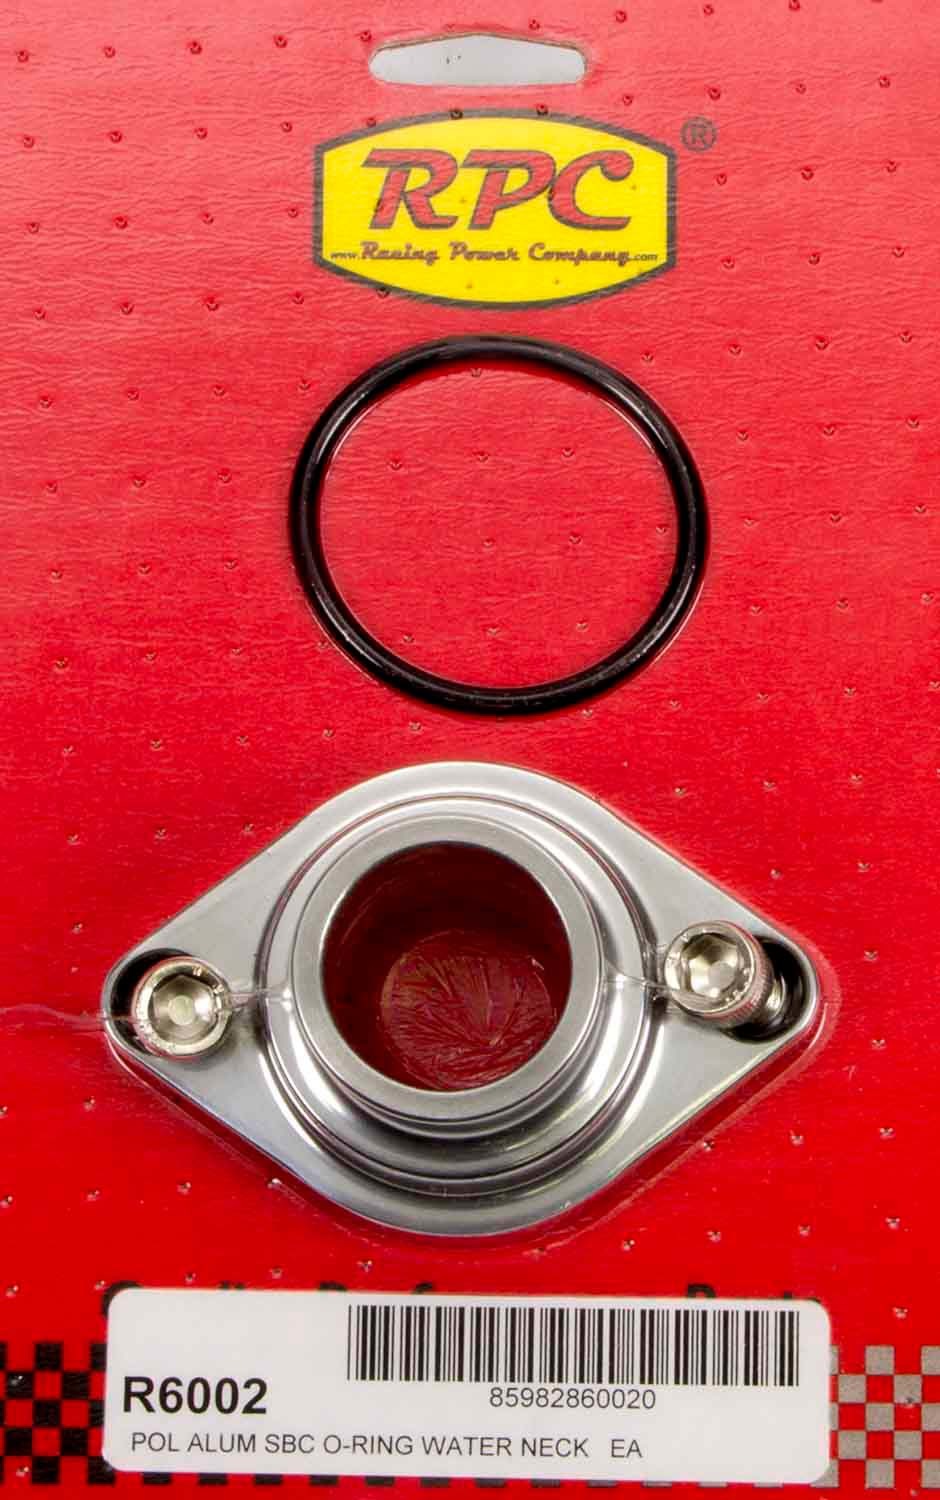 Racing Power Company R6002 - 55-64 Chevy V8 Alum Str Up Water Neck Polished